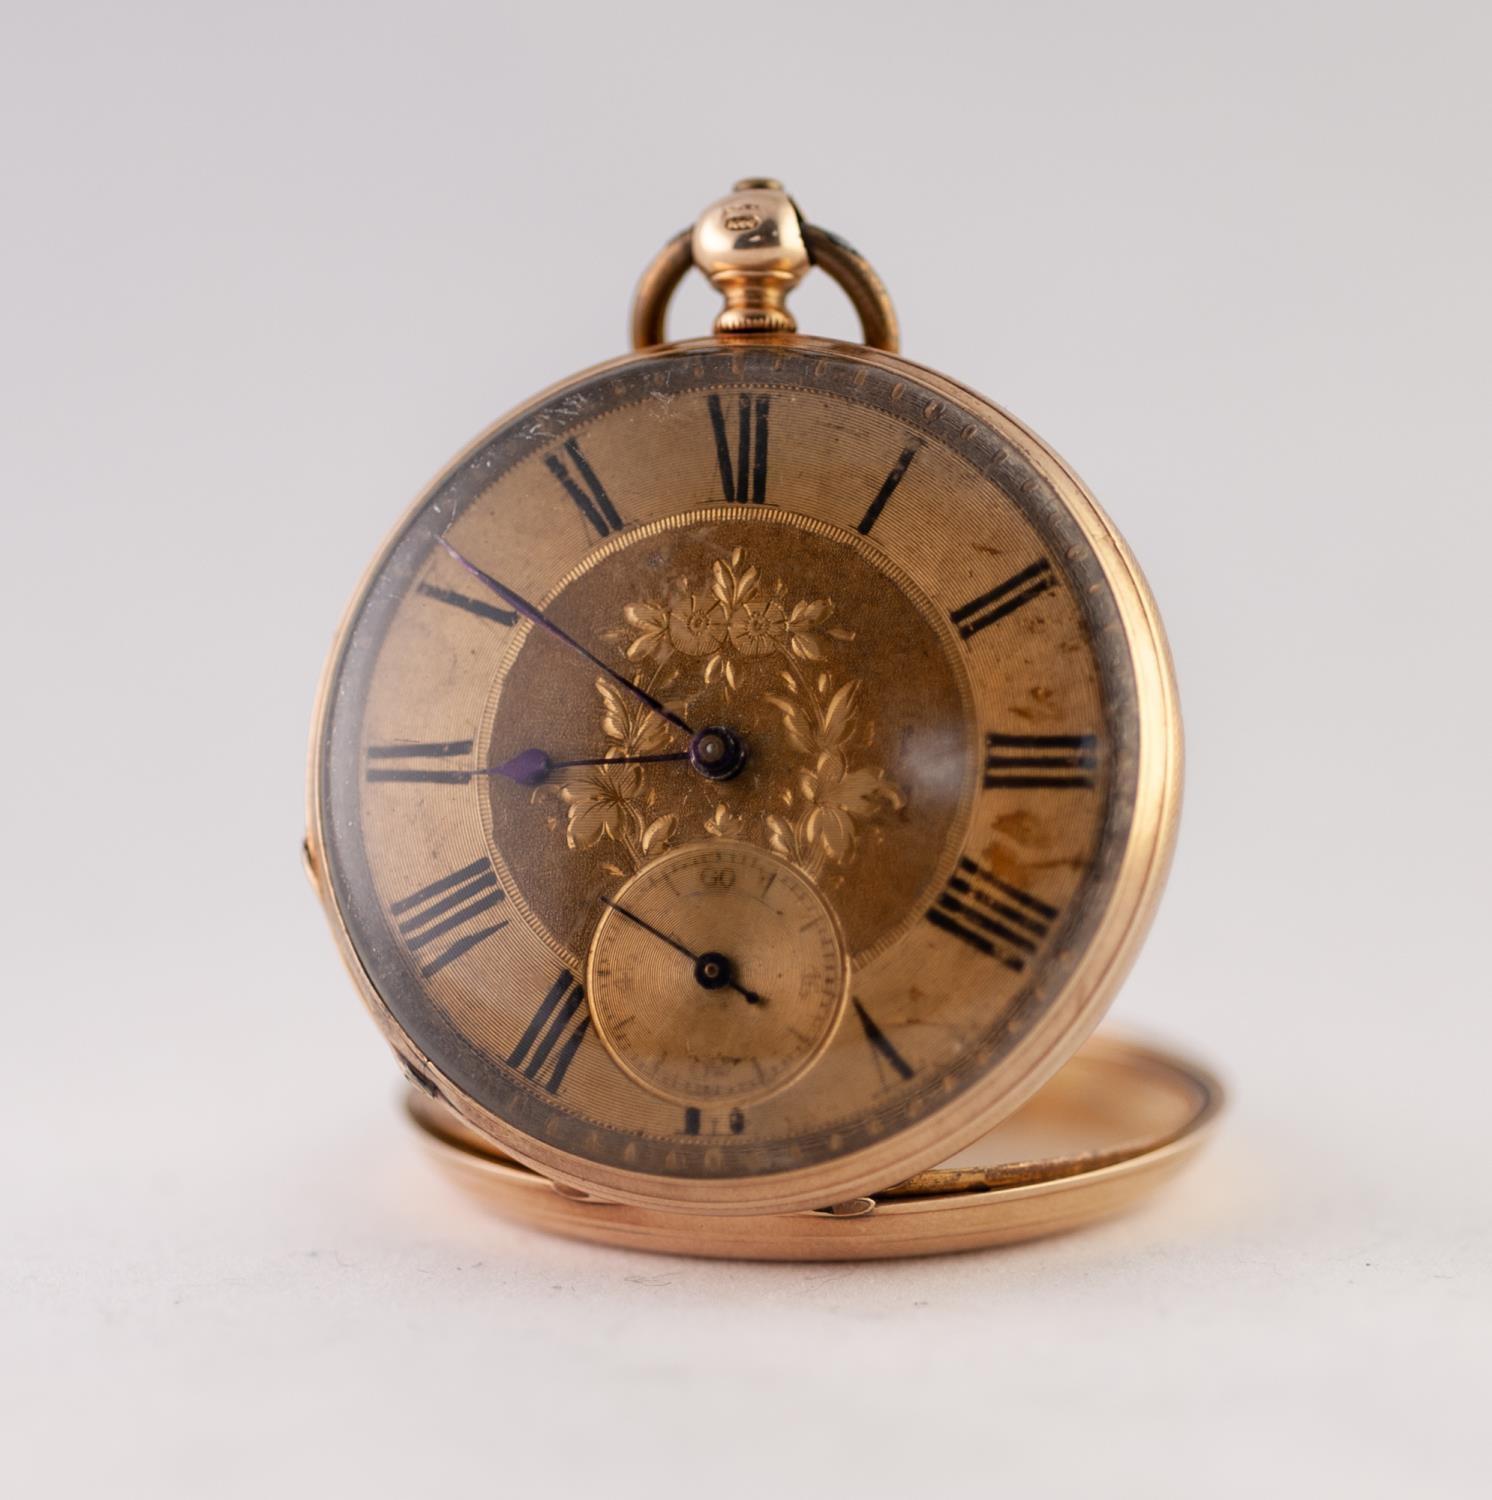 EARLY 20TH CENTURY 14ct GOLD OPEN FACED KEYWIND POCKET WATCH, the 15 jewels patent lever movement